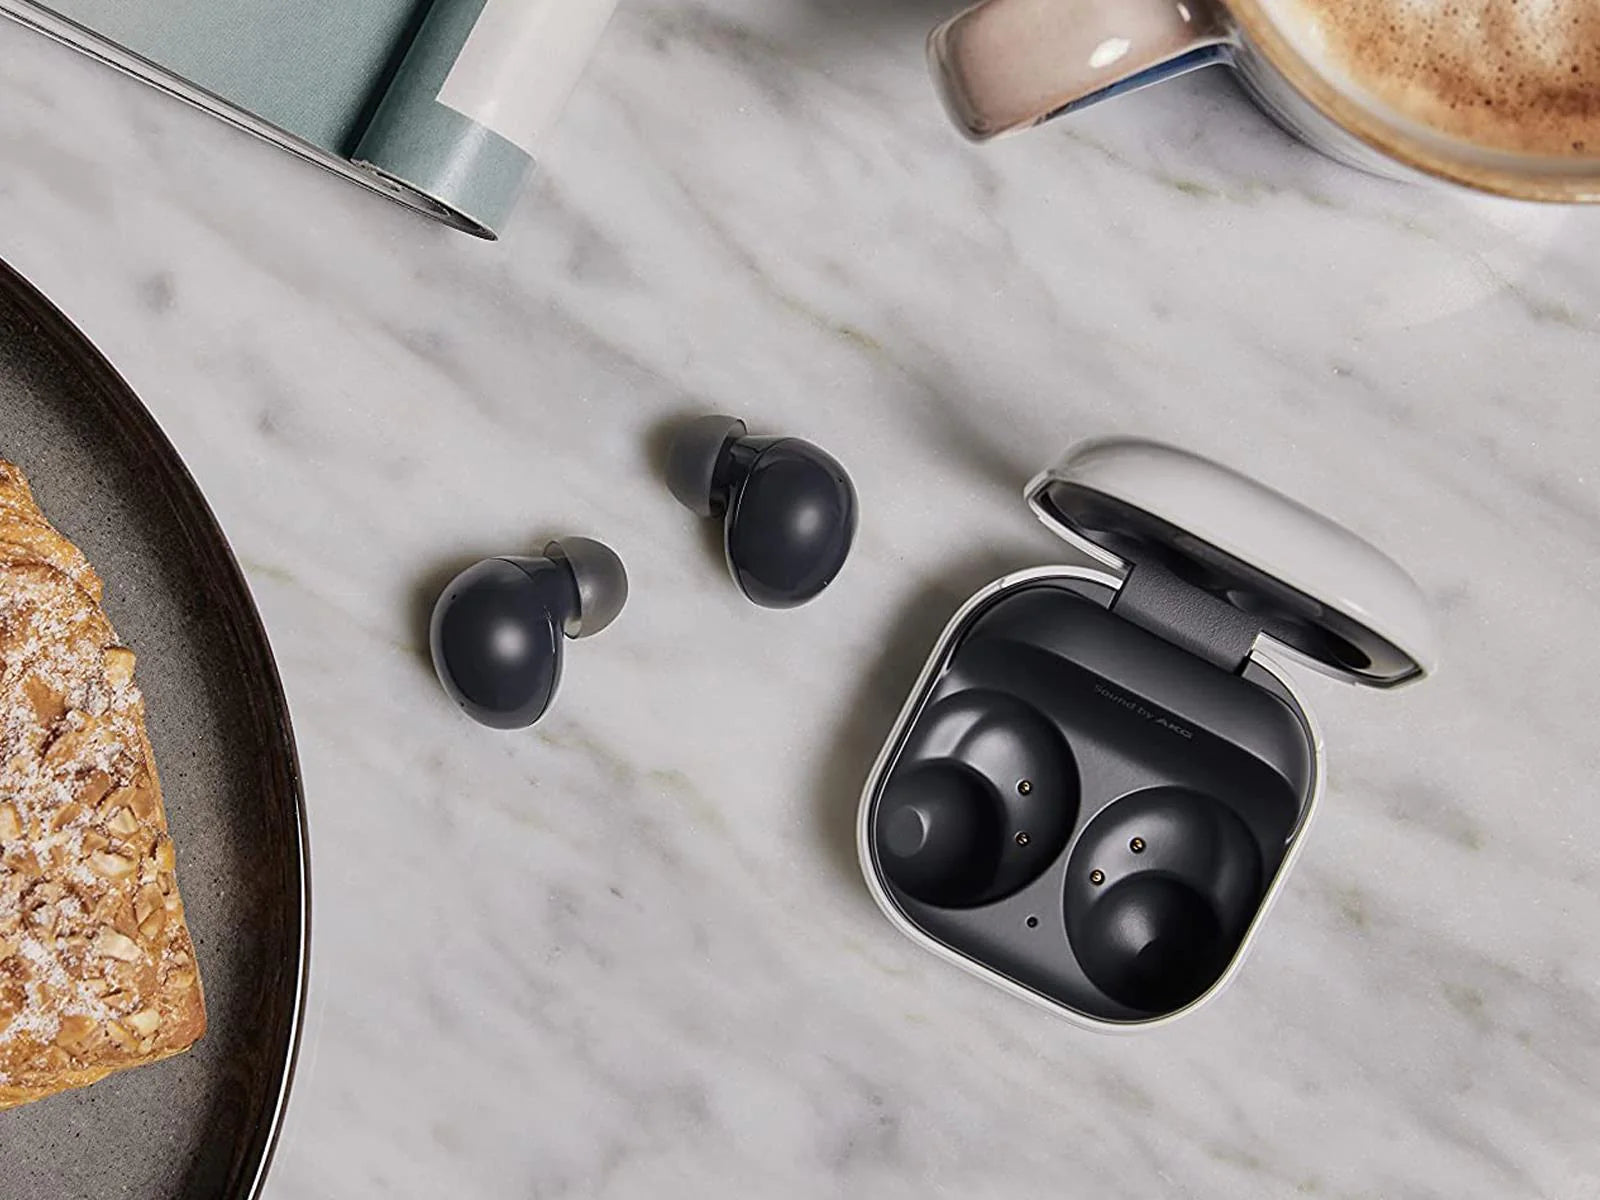  Samsung Galaxy Buds 2 With Charging Case On Table